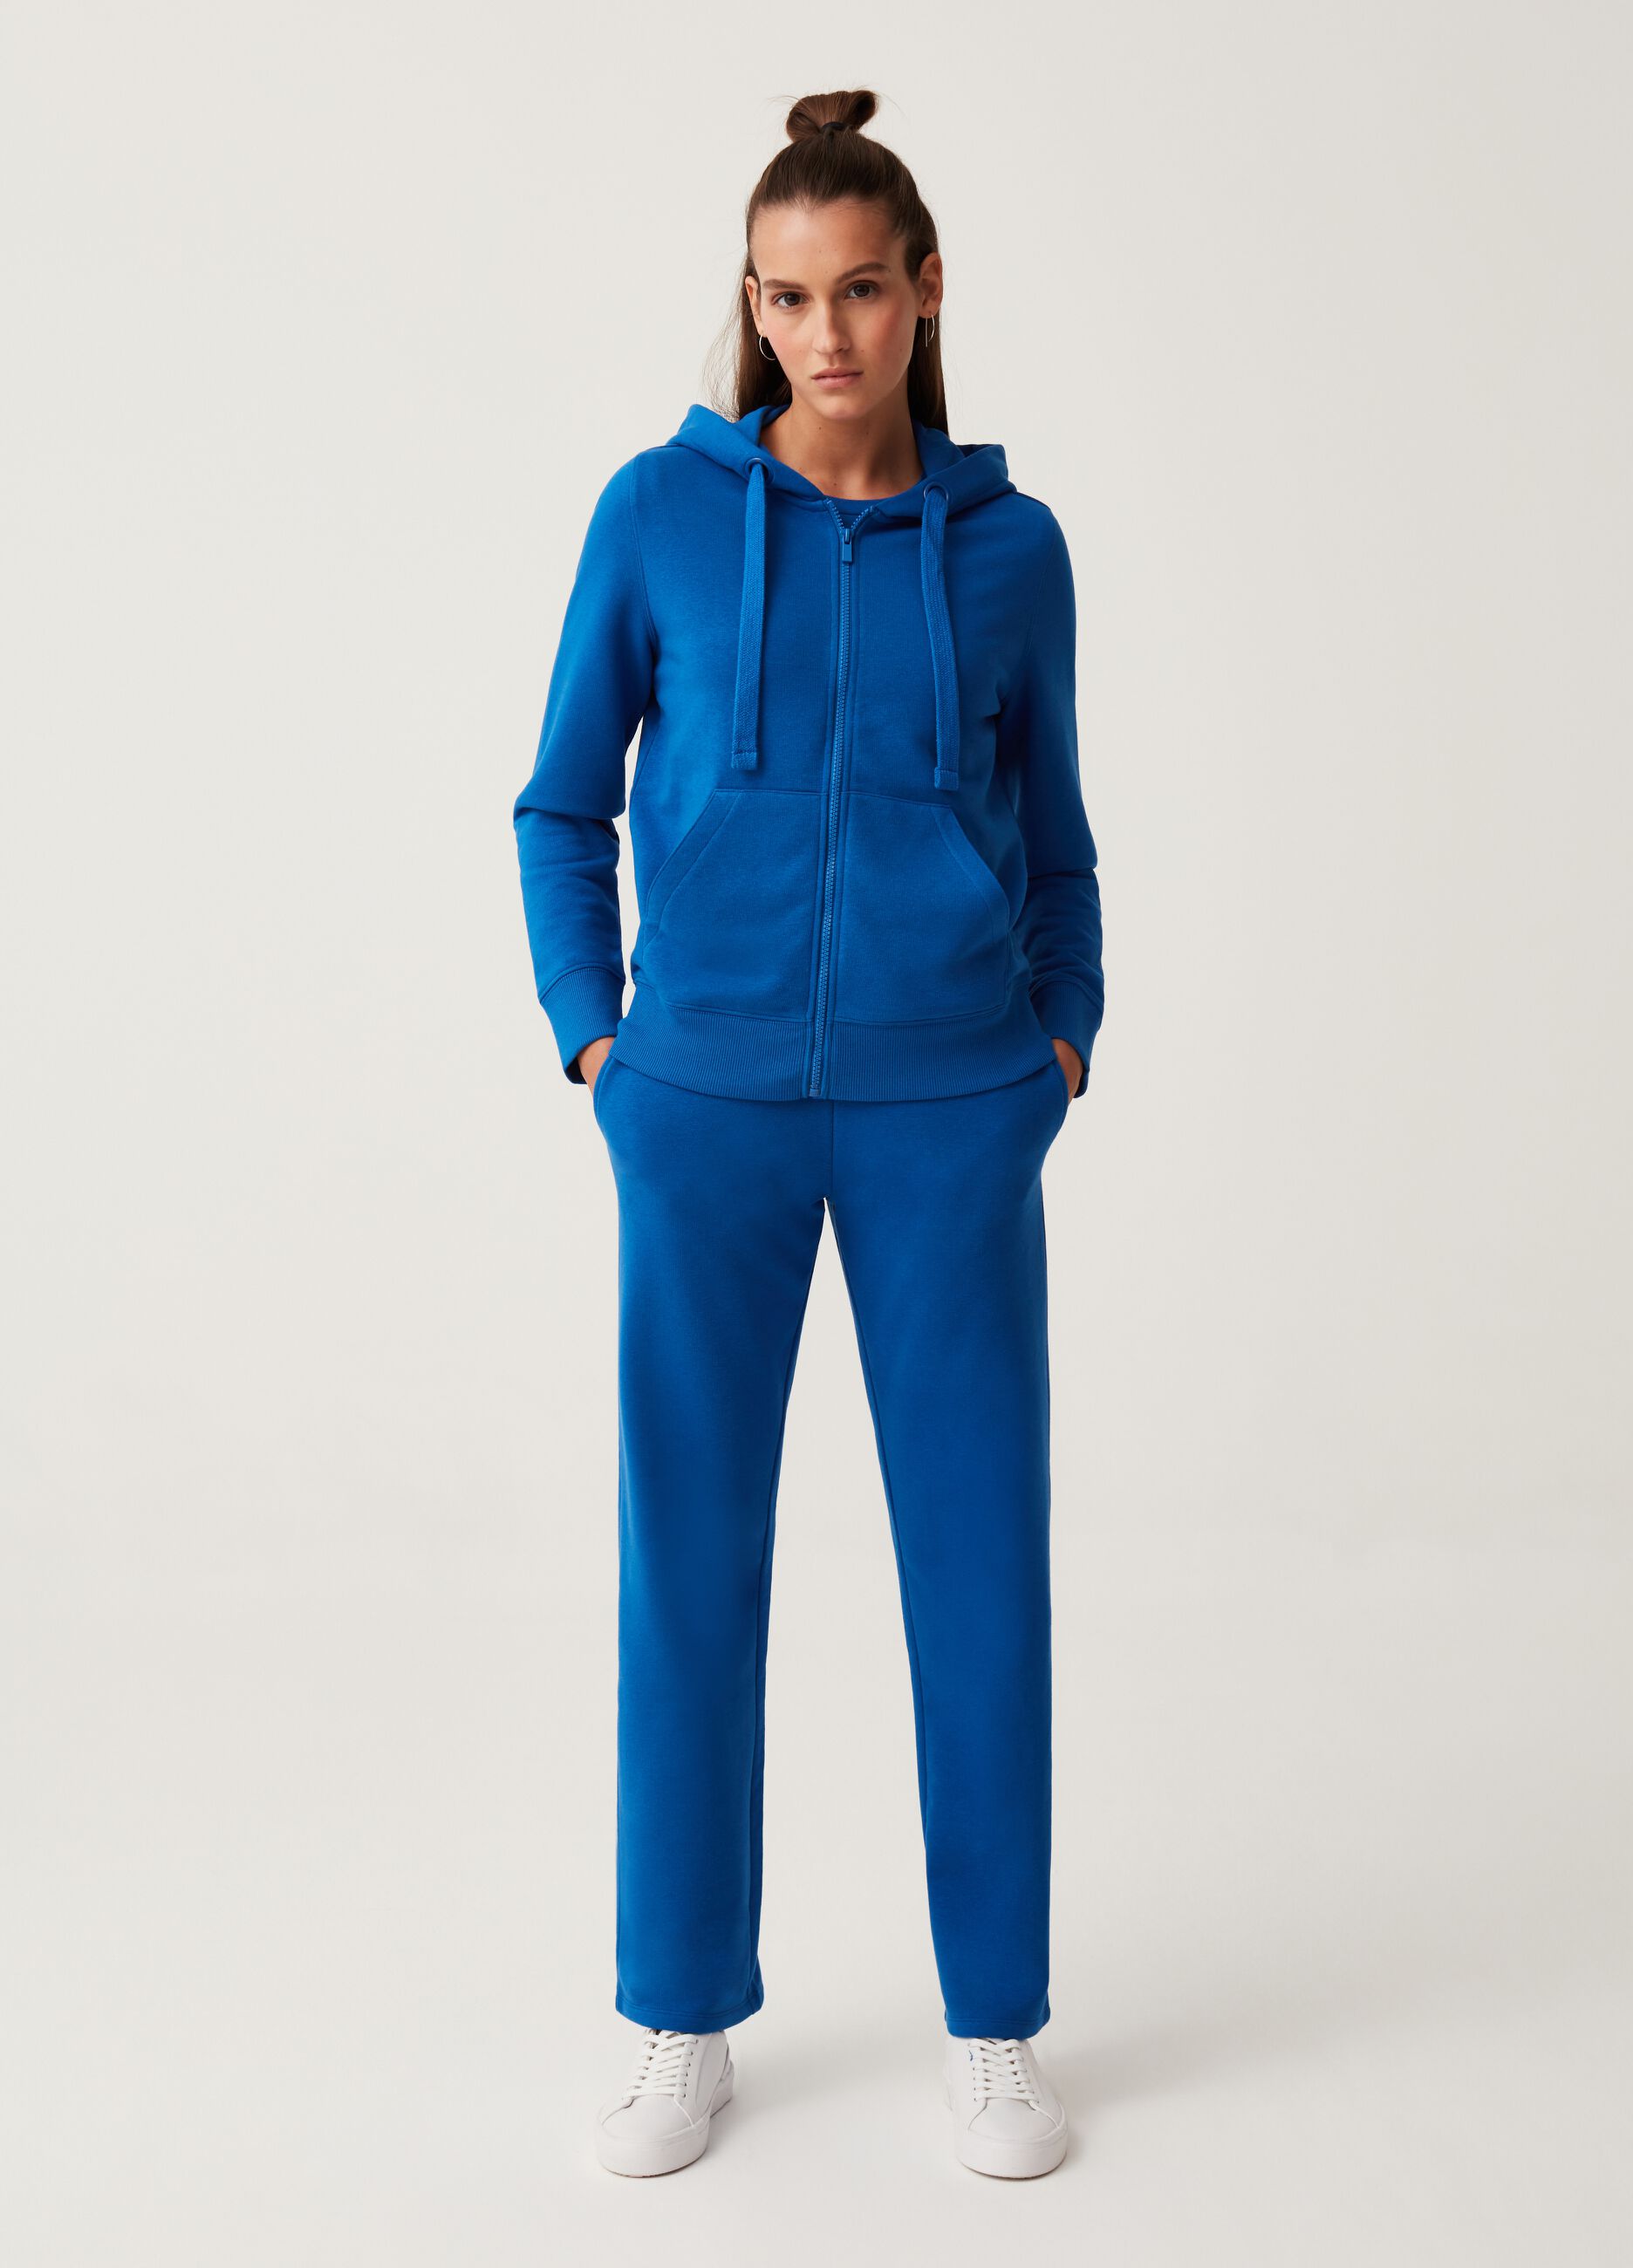 Fitness wide-leg joggers in fleece with drawstring